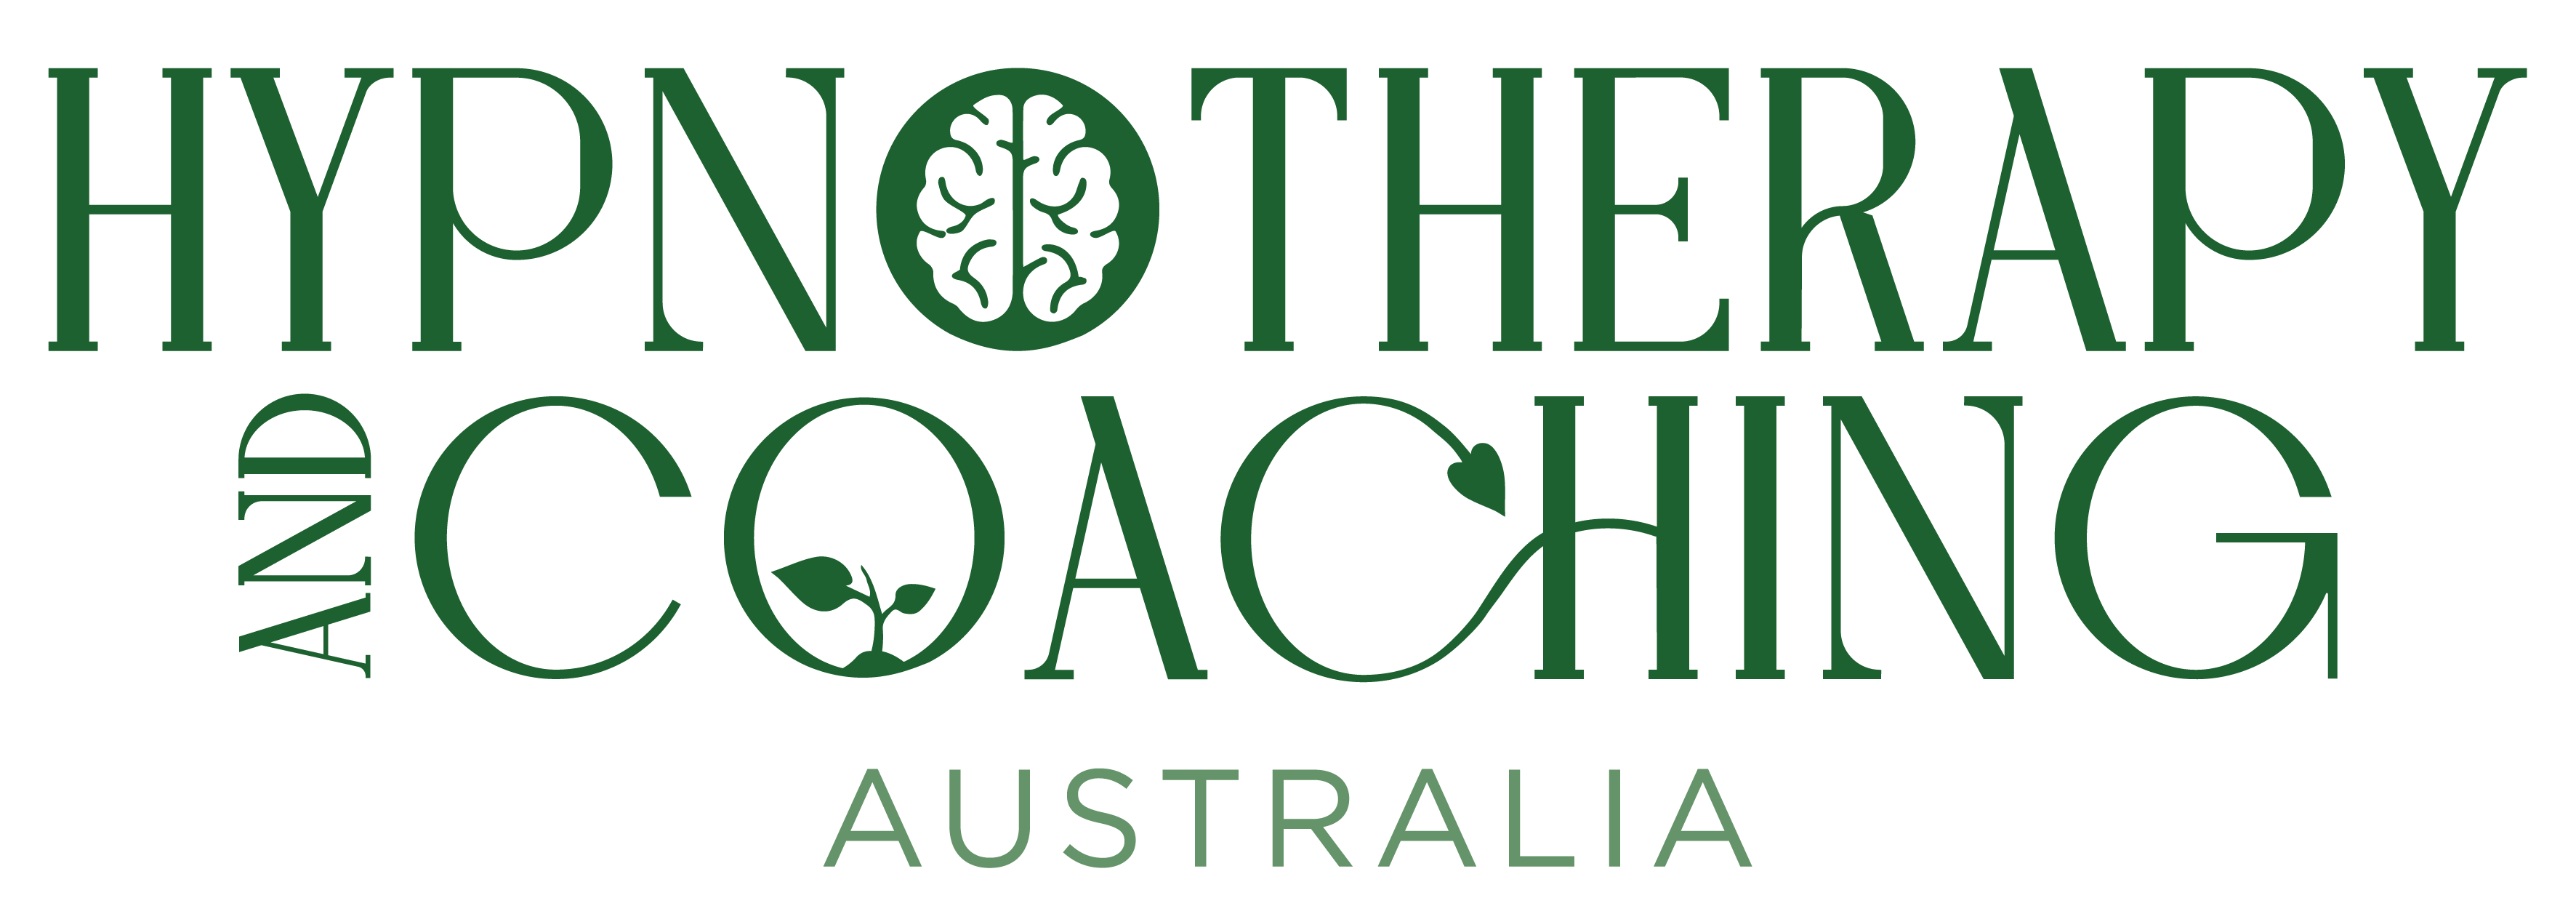 Hypnotherapy and Coaching Australia